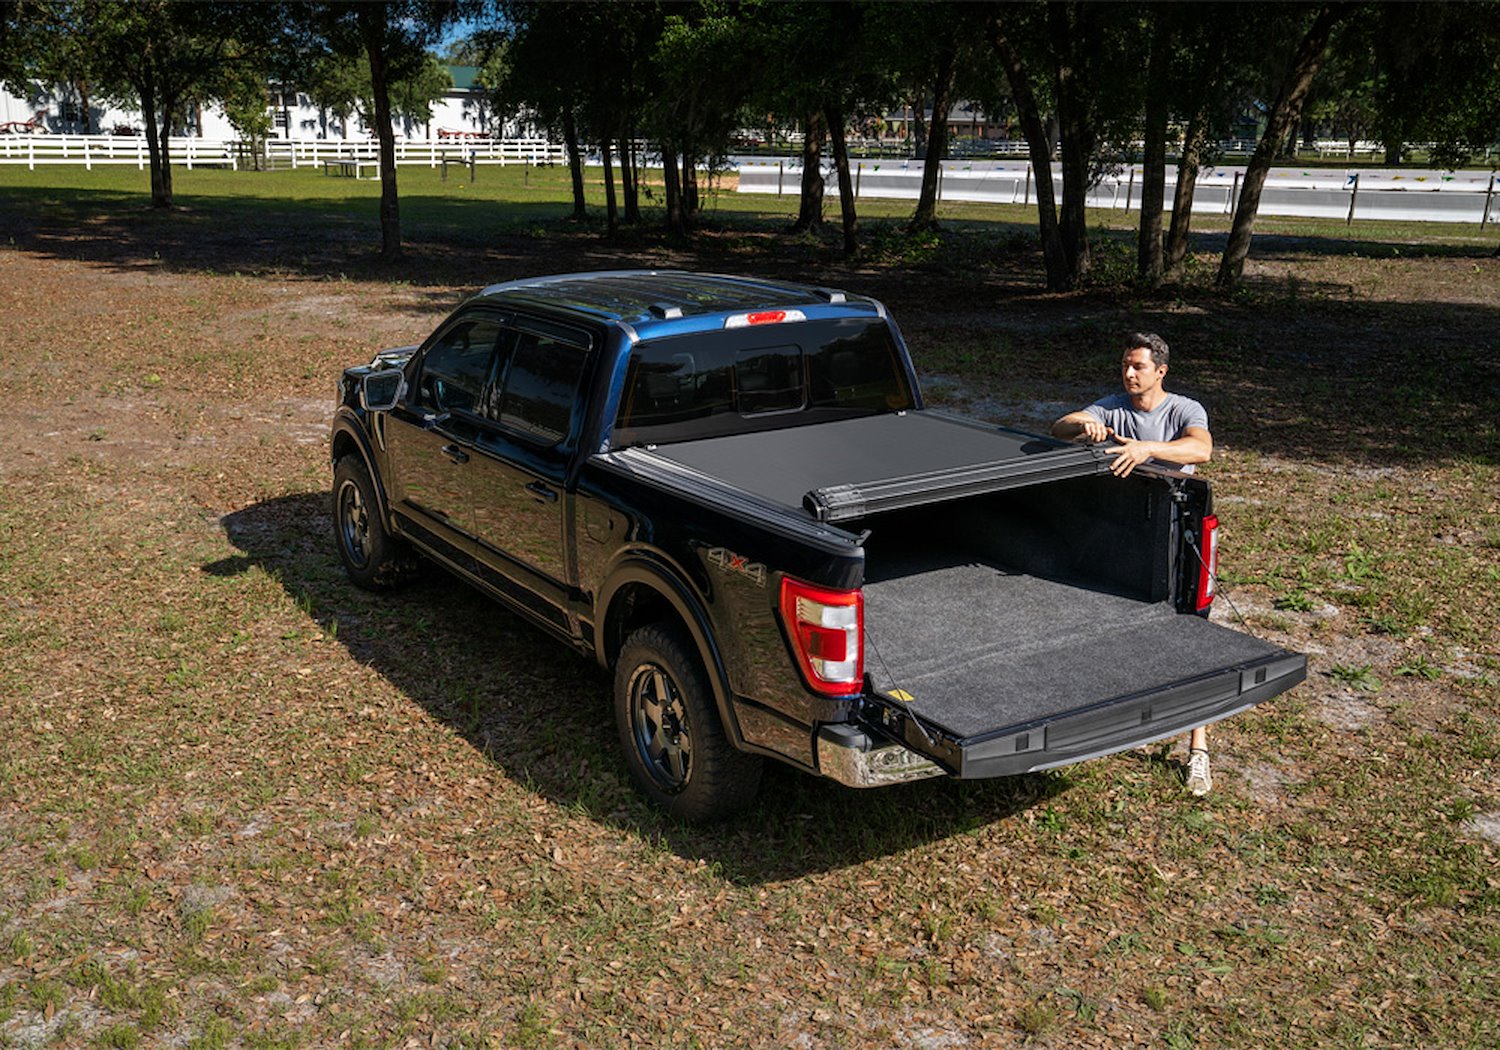 80337 Revolver X4s for Fits Select Ford F-150 6.5 ft. Bed, Roll-Up Hard Cover Style [Black Finish]